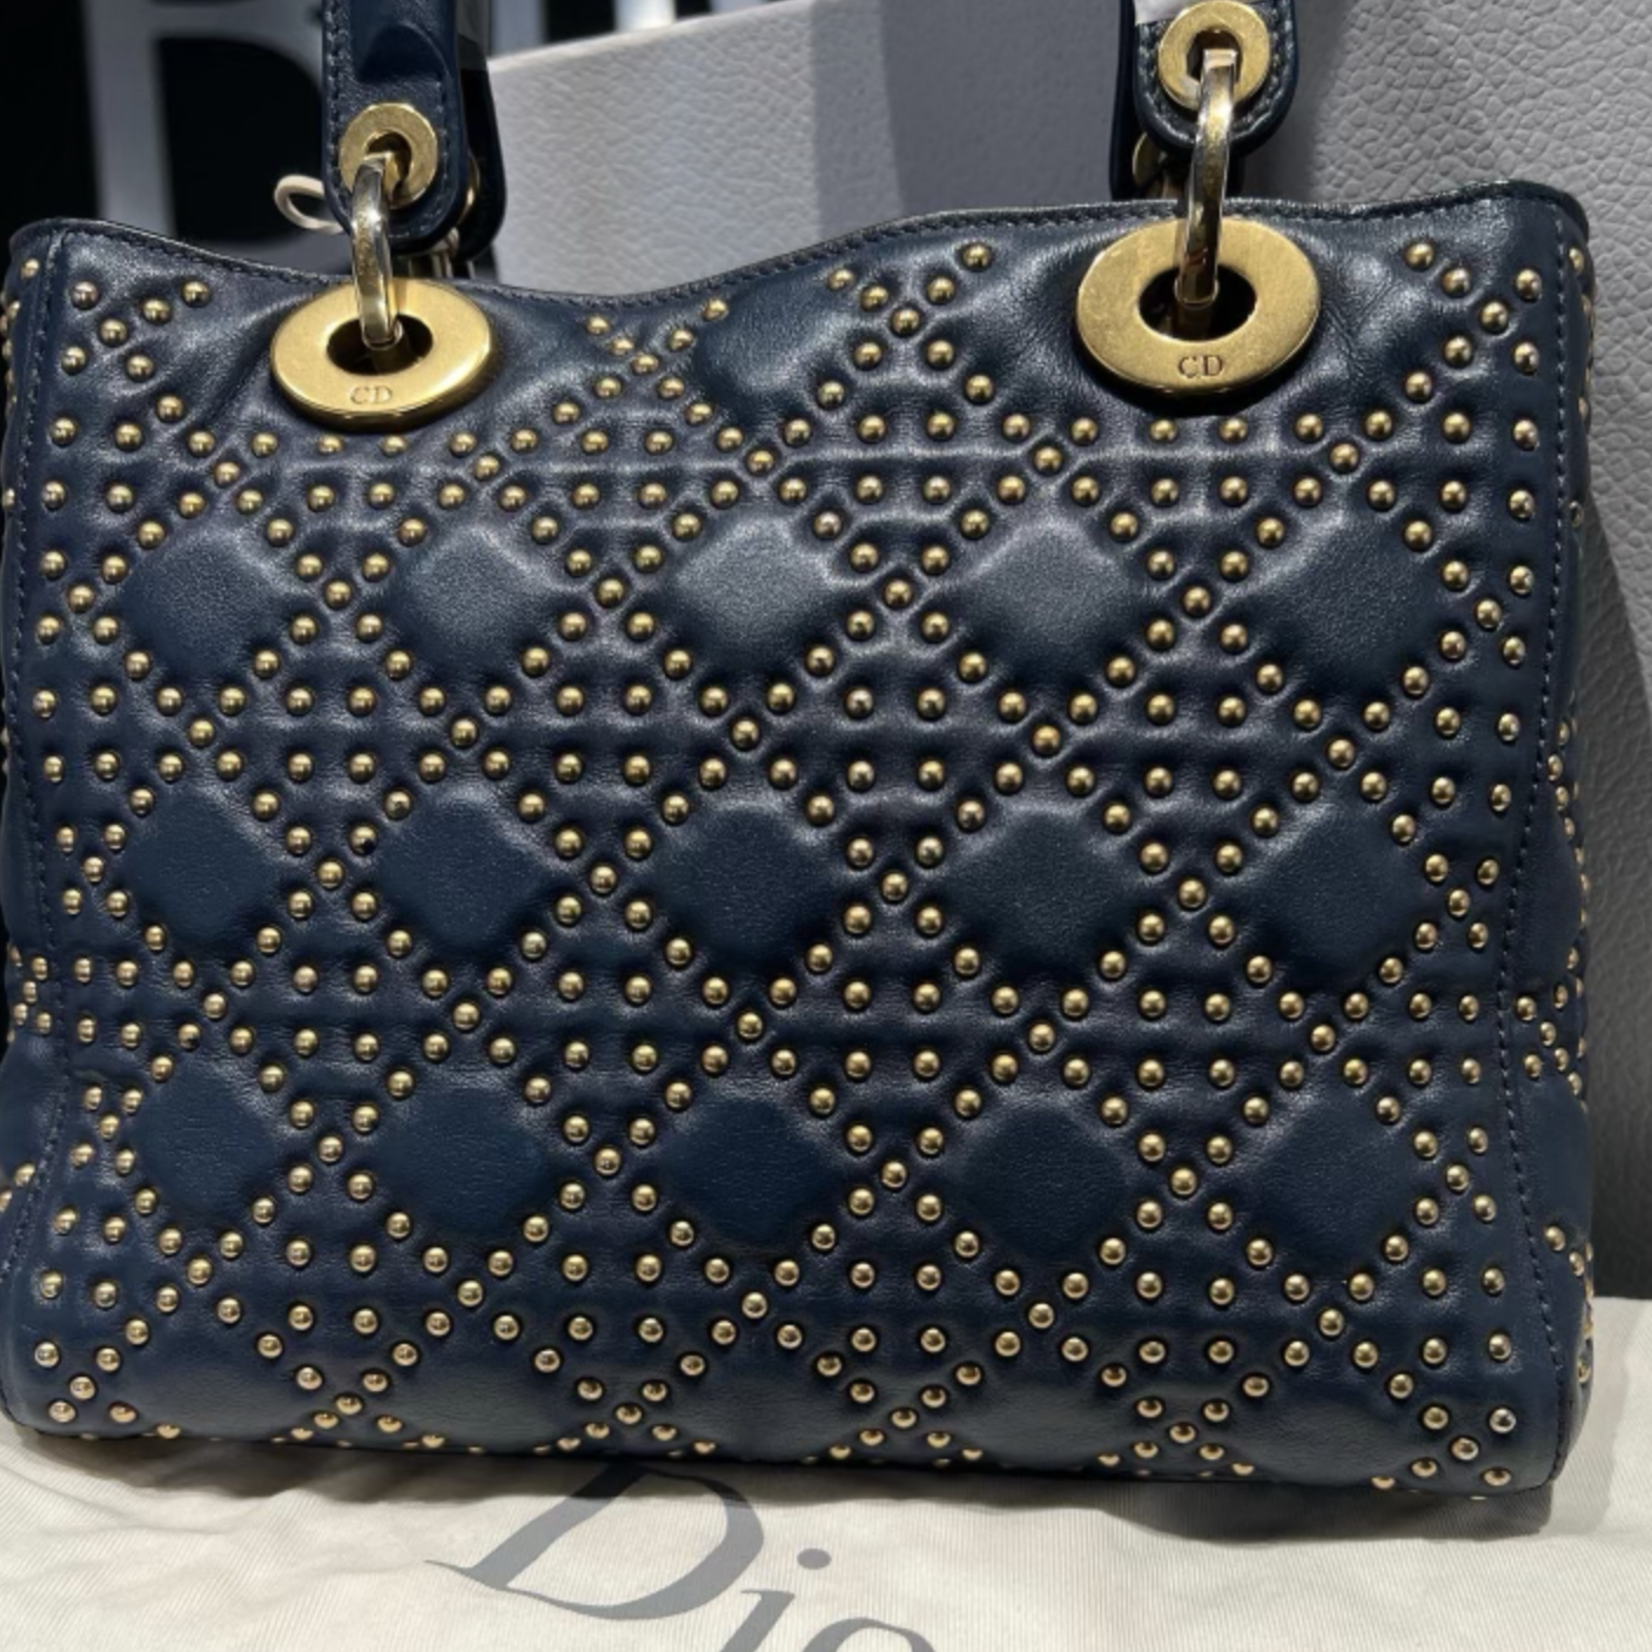 IEG Luxe  FOR SALE CD Lady Dior Studded Limited Edition Bag BRAND  NEW BEST PRICE  Facebook